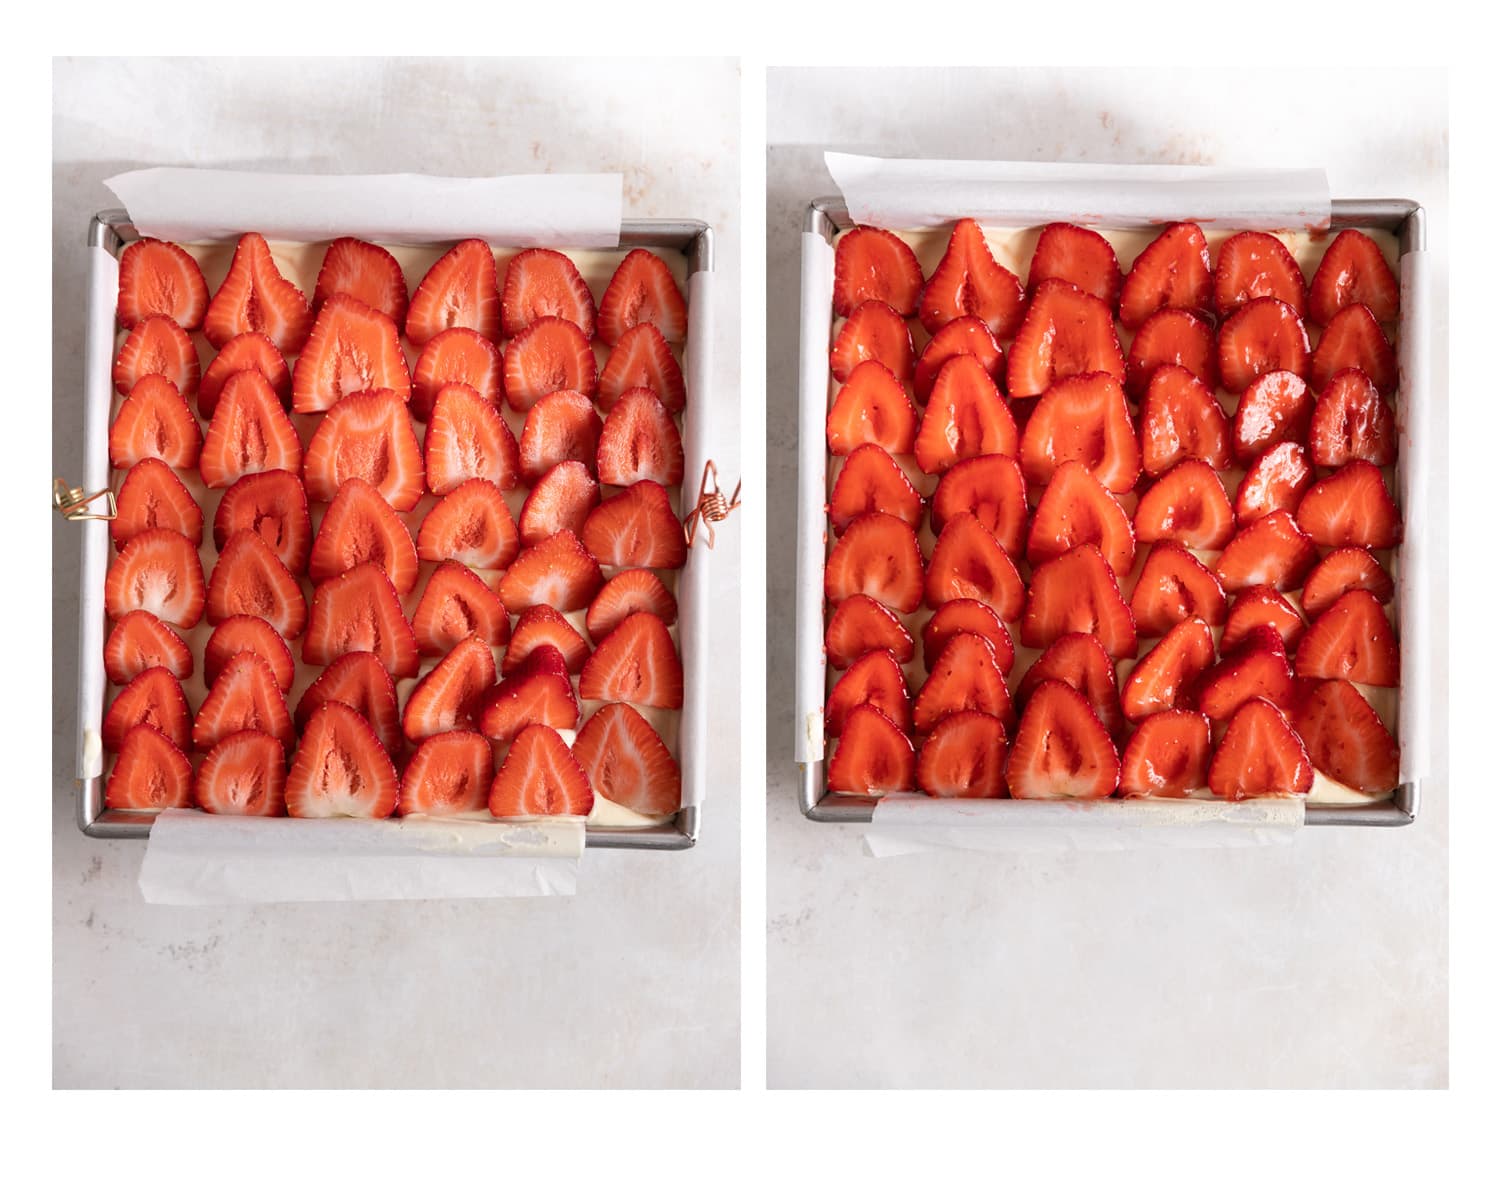 Process images showing how to assemble the strawberry layer of the German Strawberry Cake.